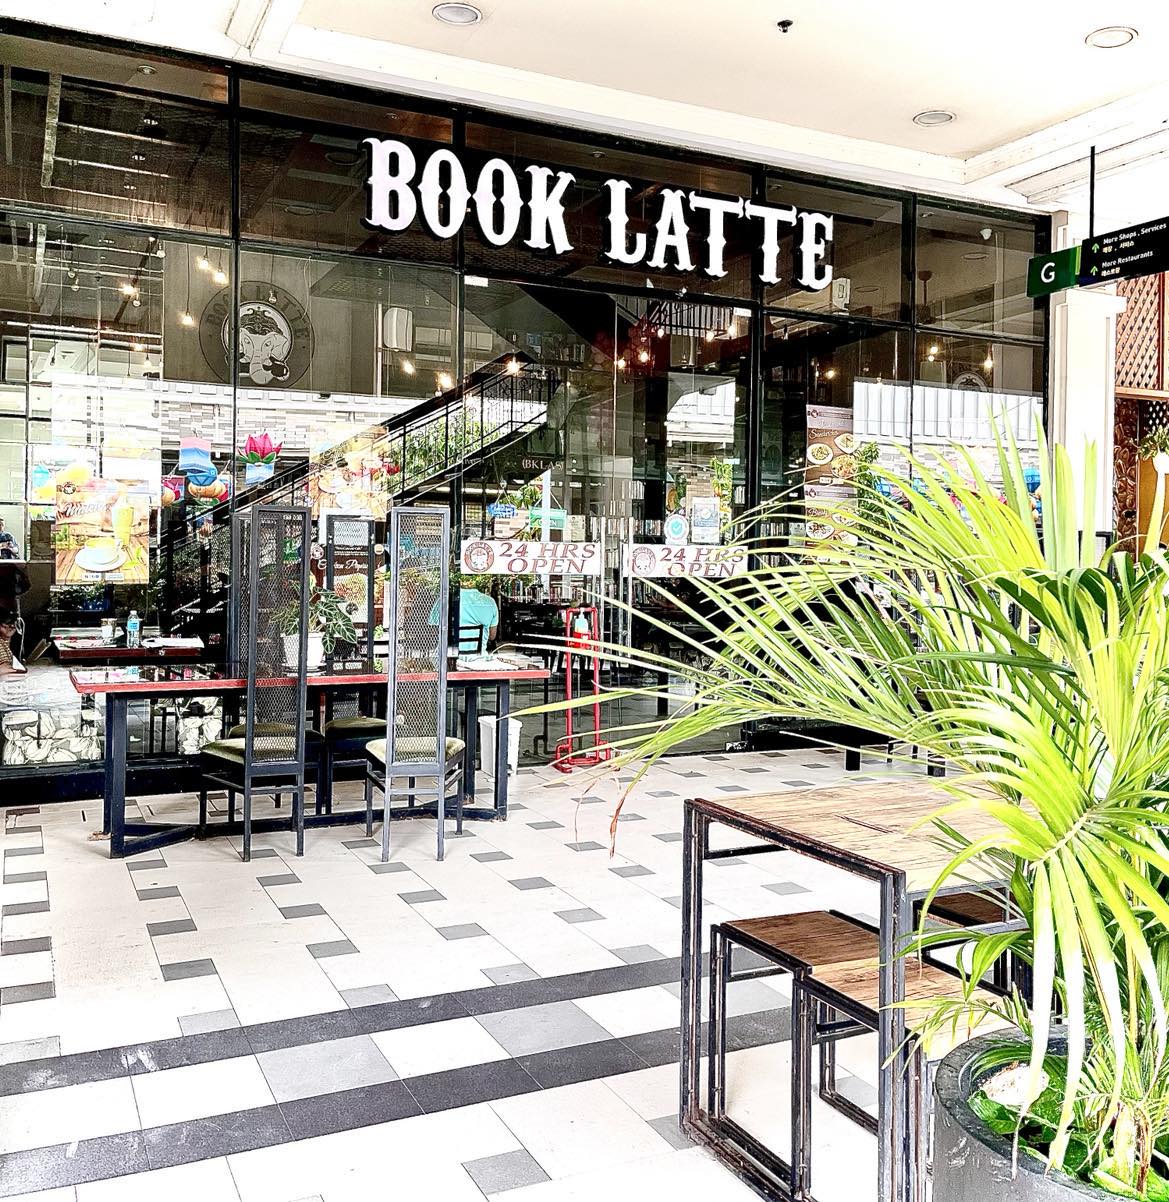 Book Latté art space is acquiescent to City of Love